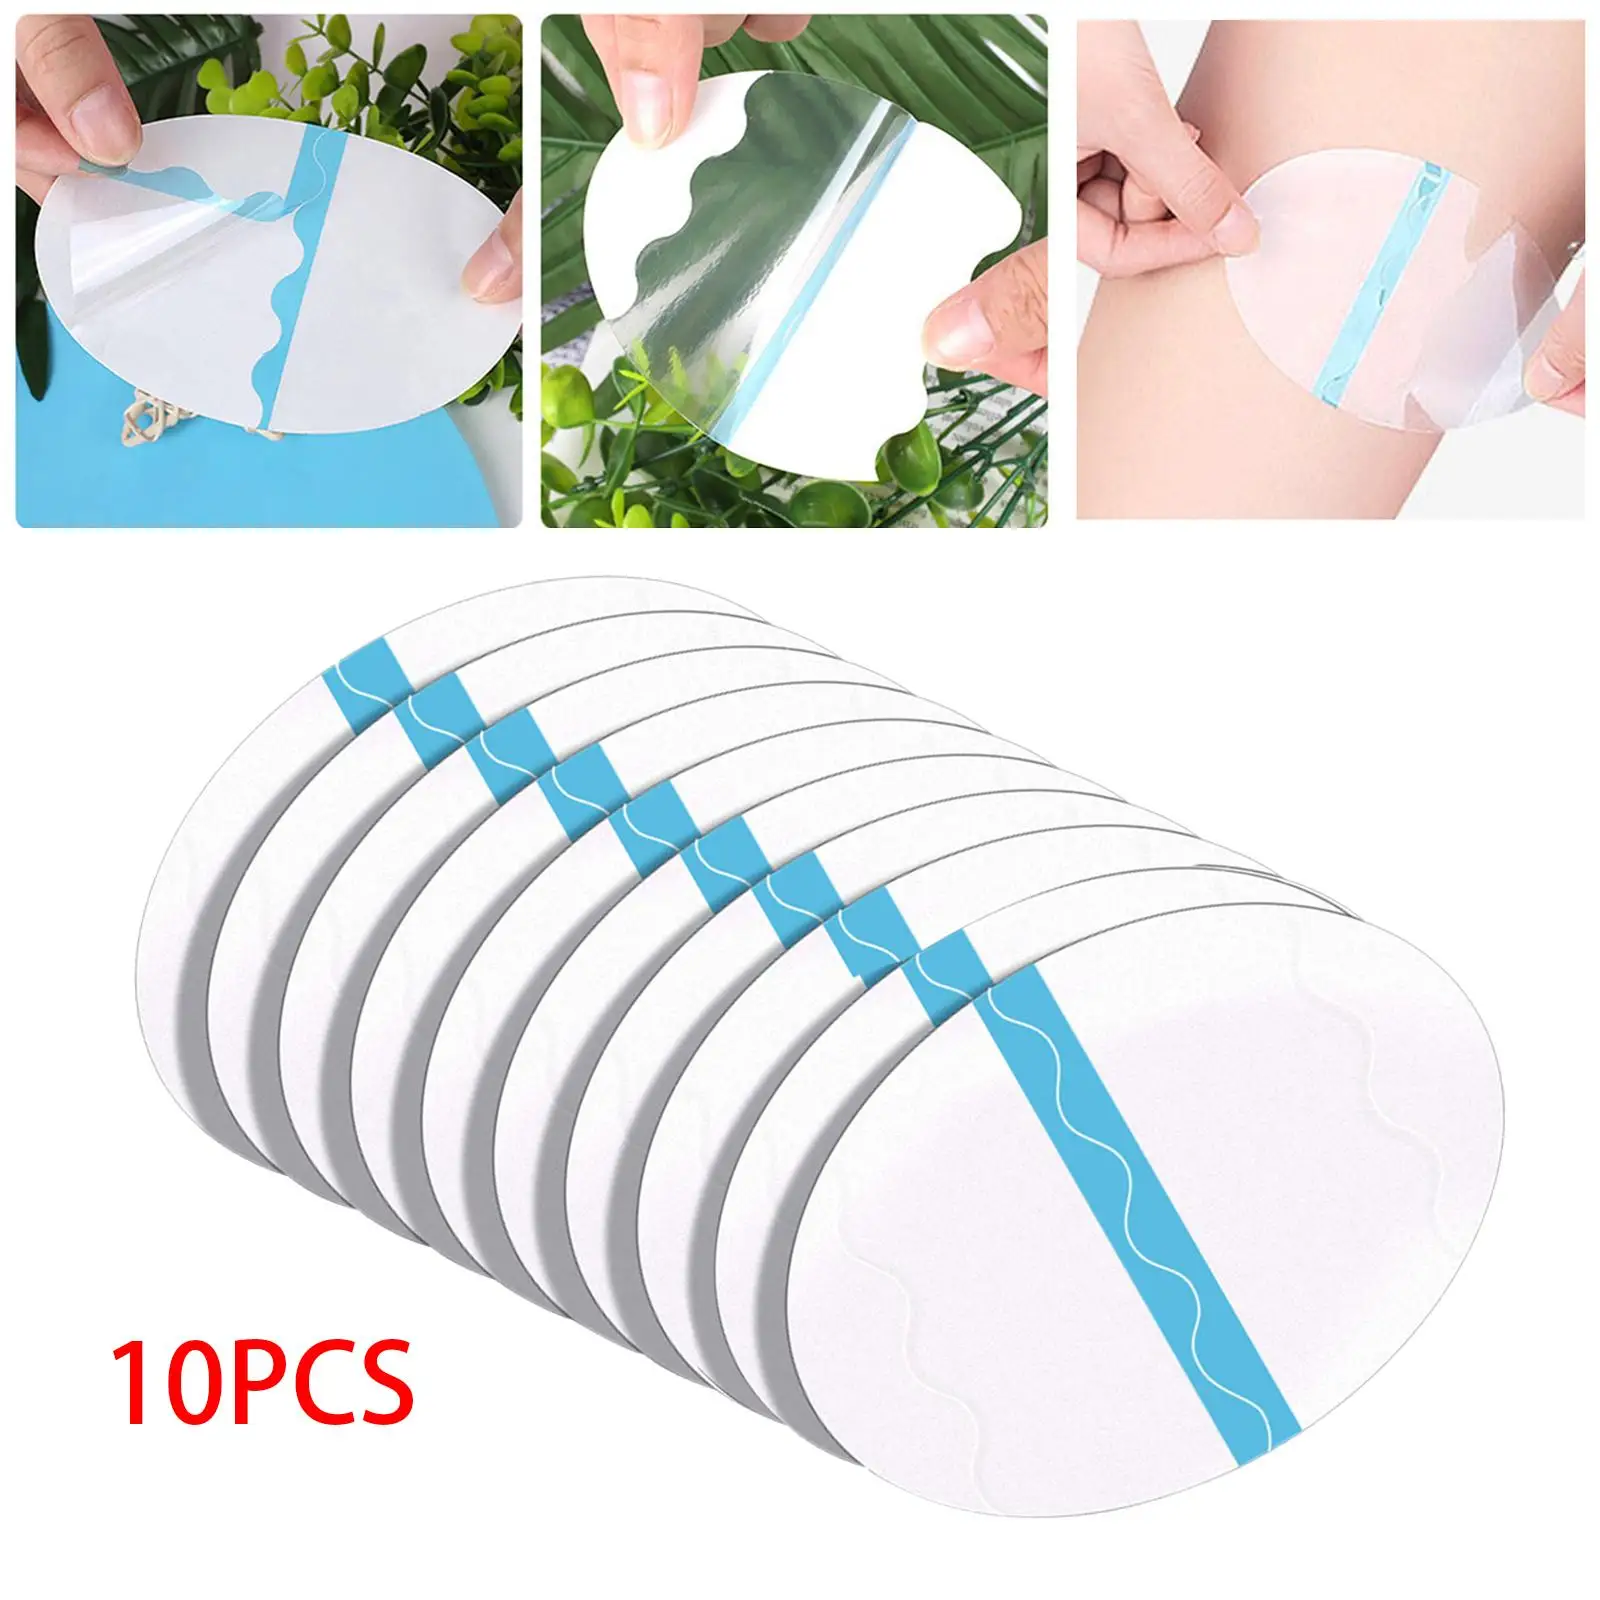 10 Count Transparent Anti Chafing Thigh Tapes Chaffing Body Protection TPU